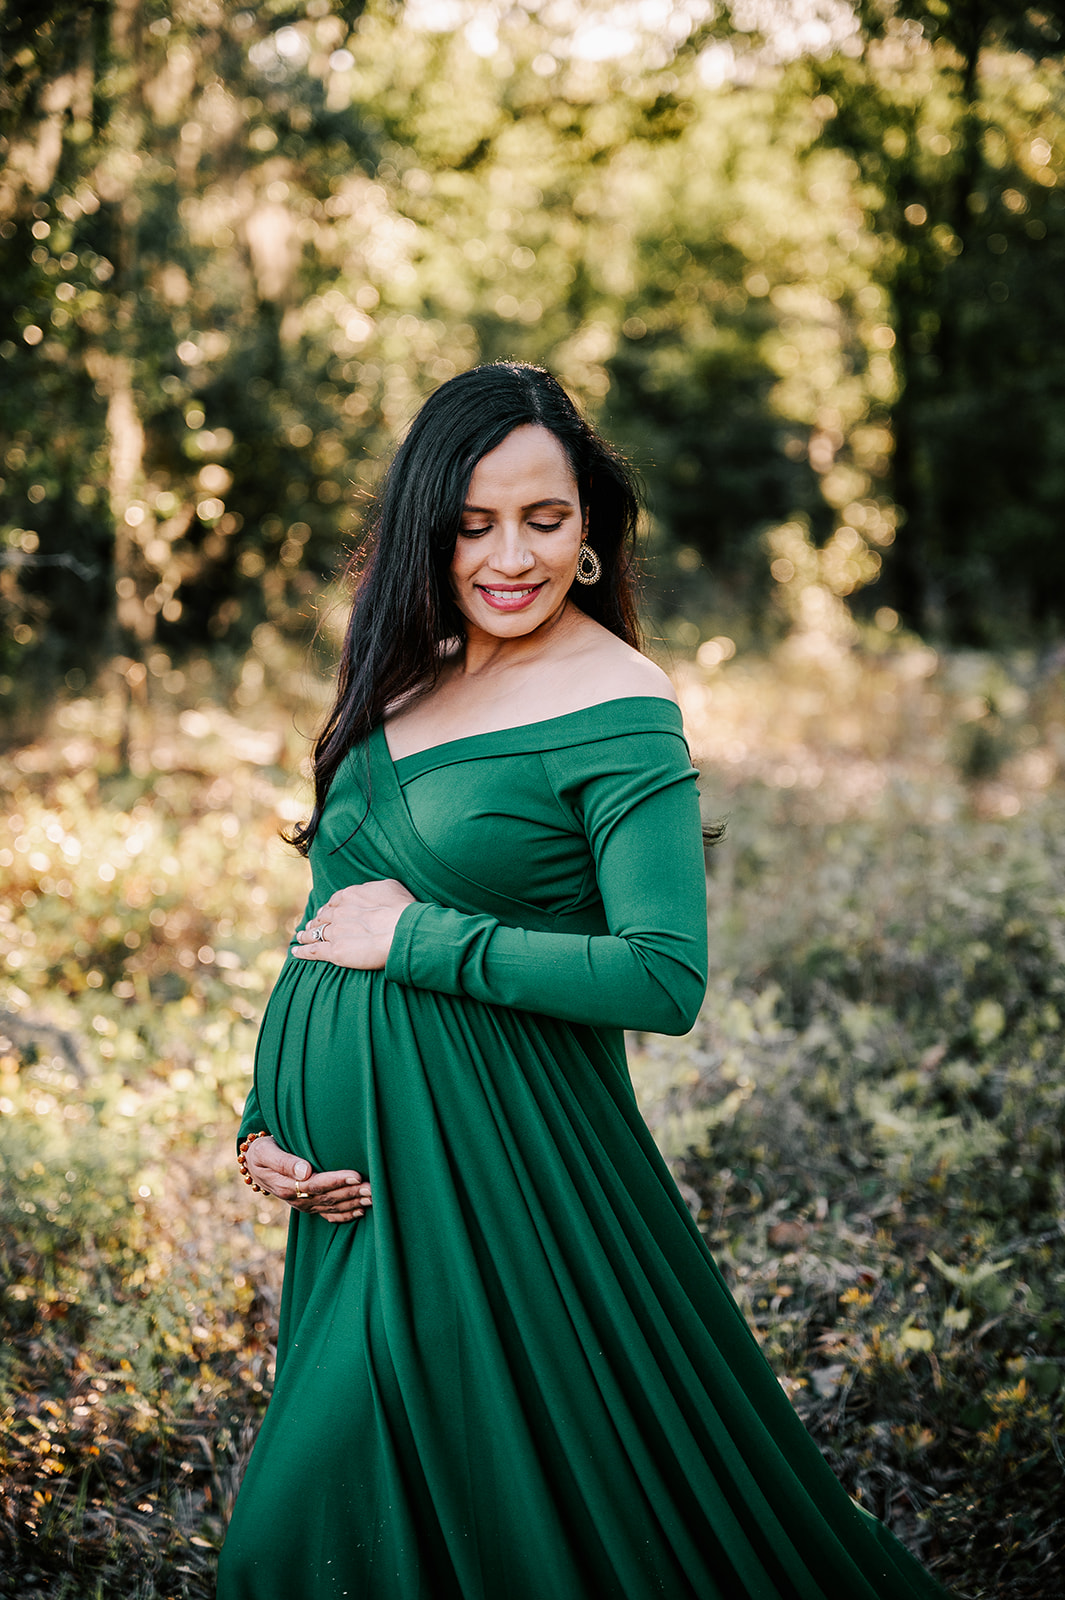 A mother to be happily walks through a forest in a green maternity gown at sunset